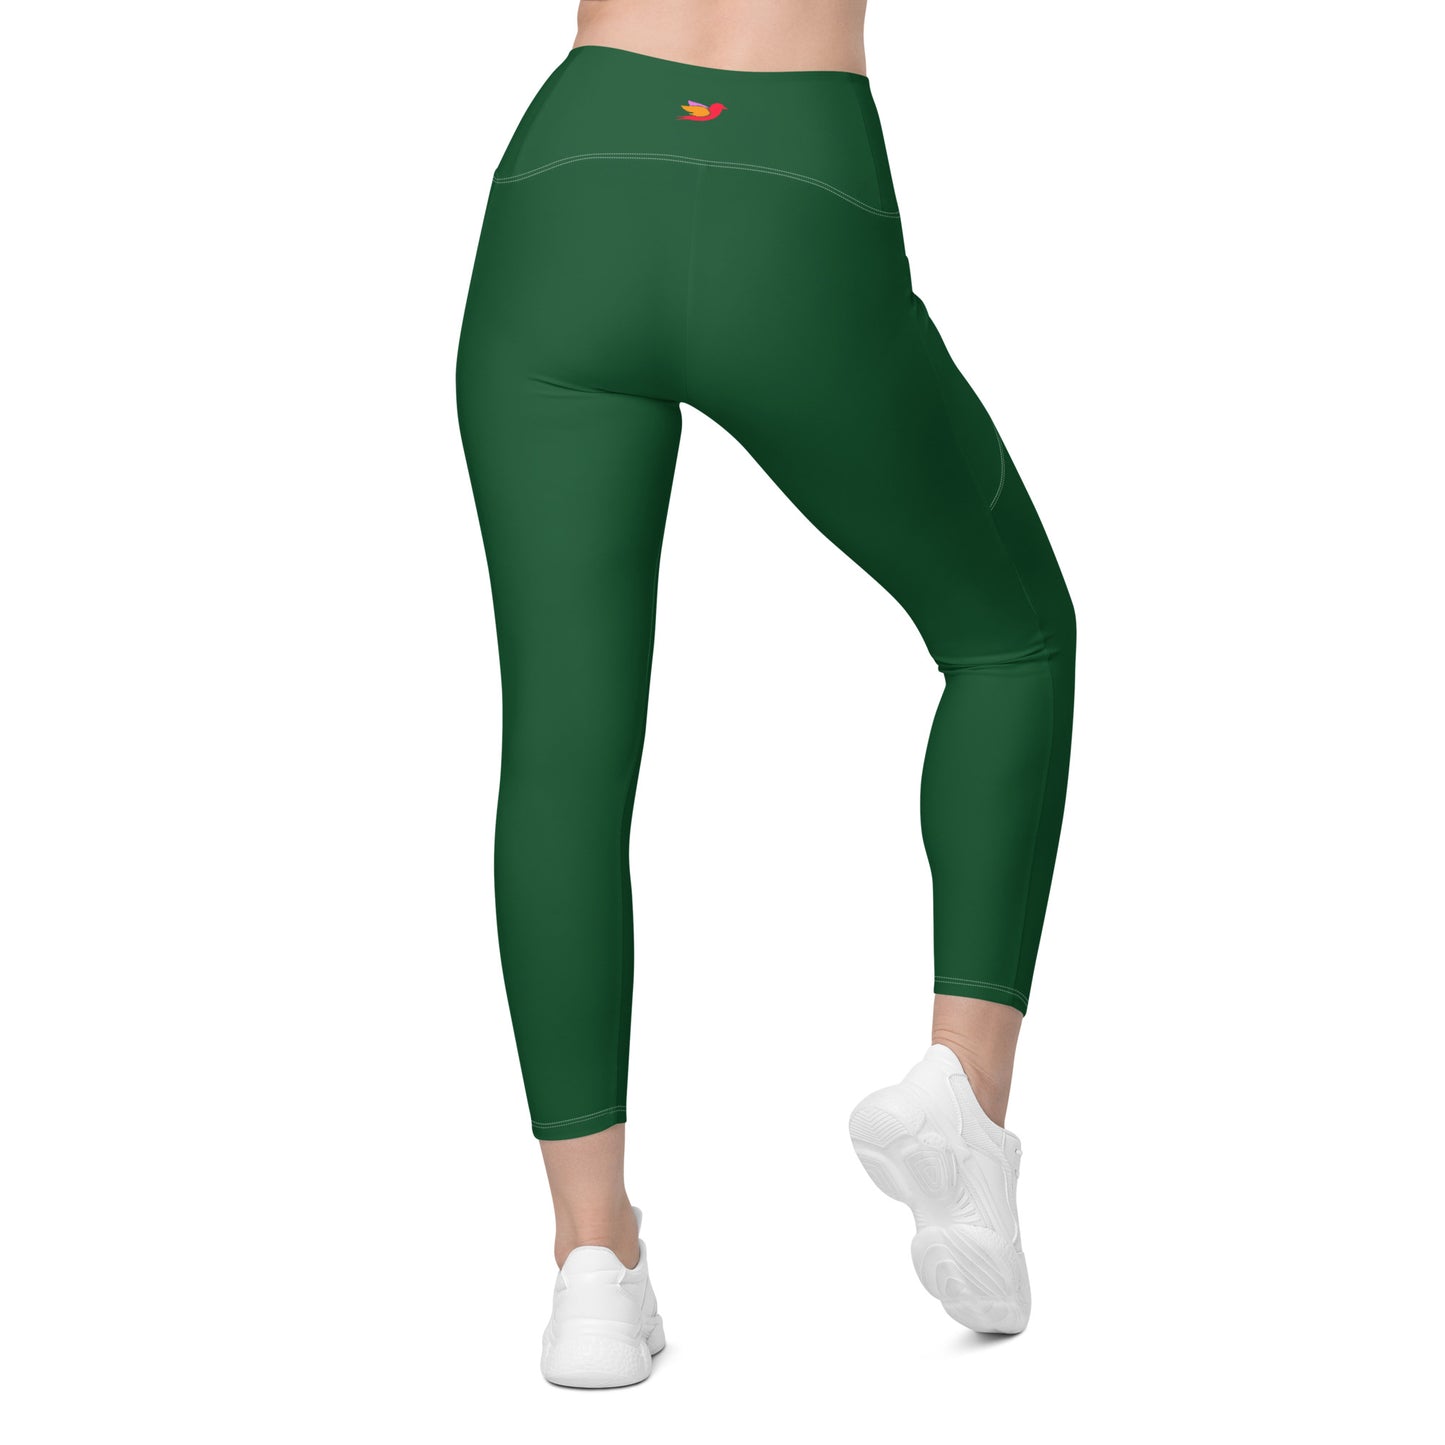 Edelweiss Solid Green High Waist 7/8 Recycled Yoga Leggings / Yoga Pants with Pockets